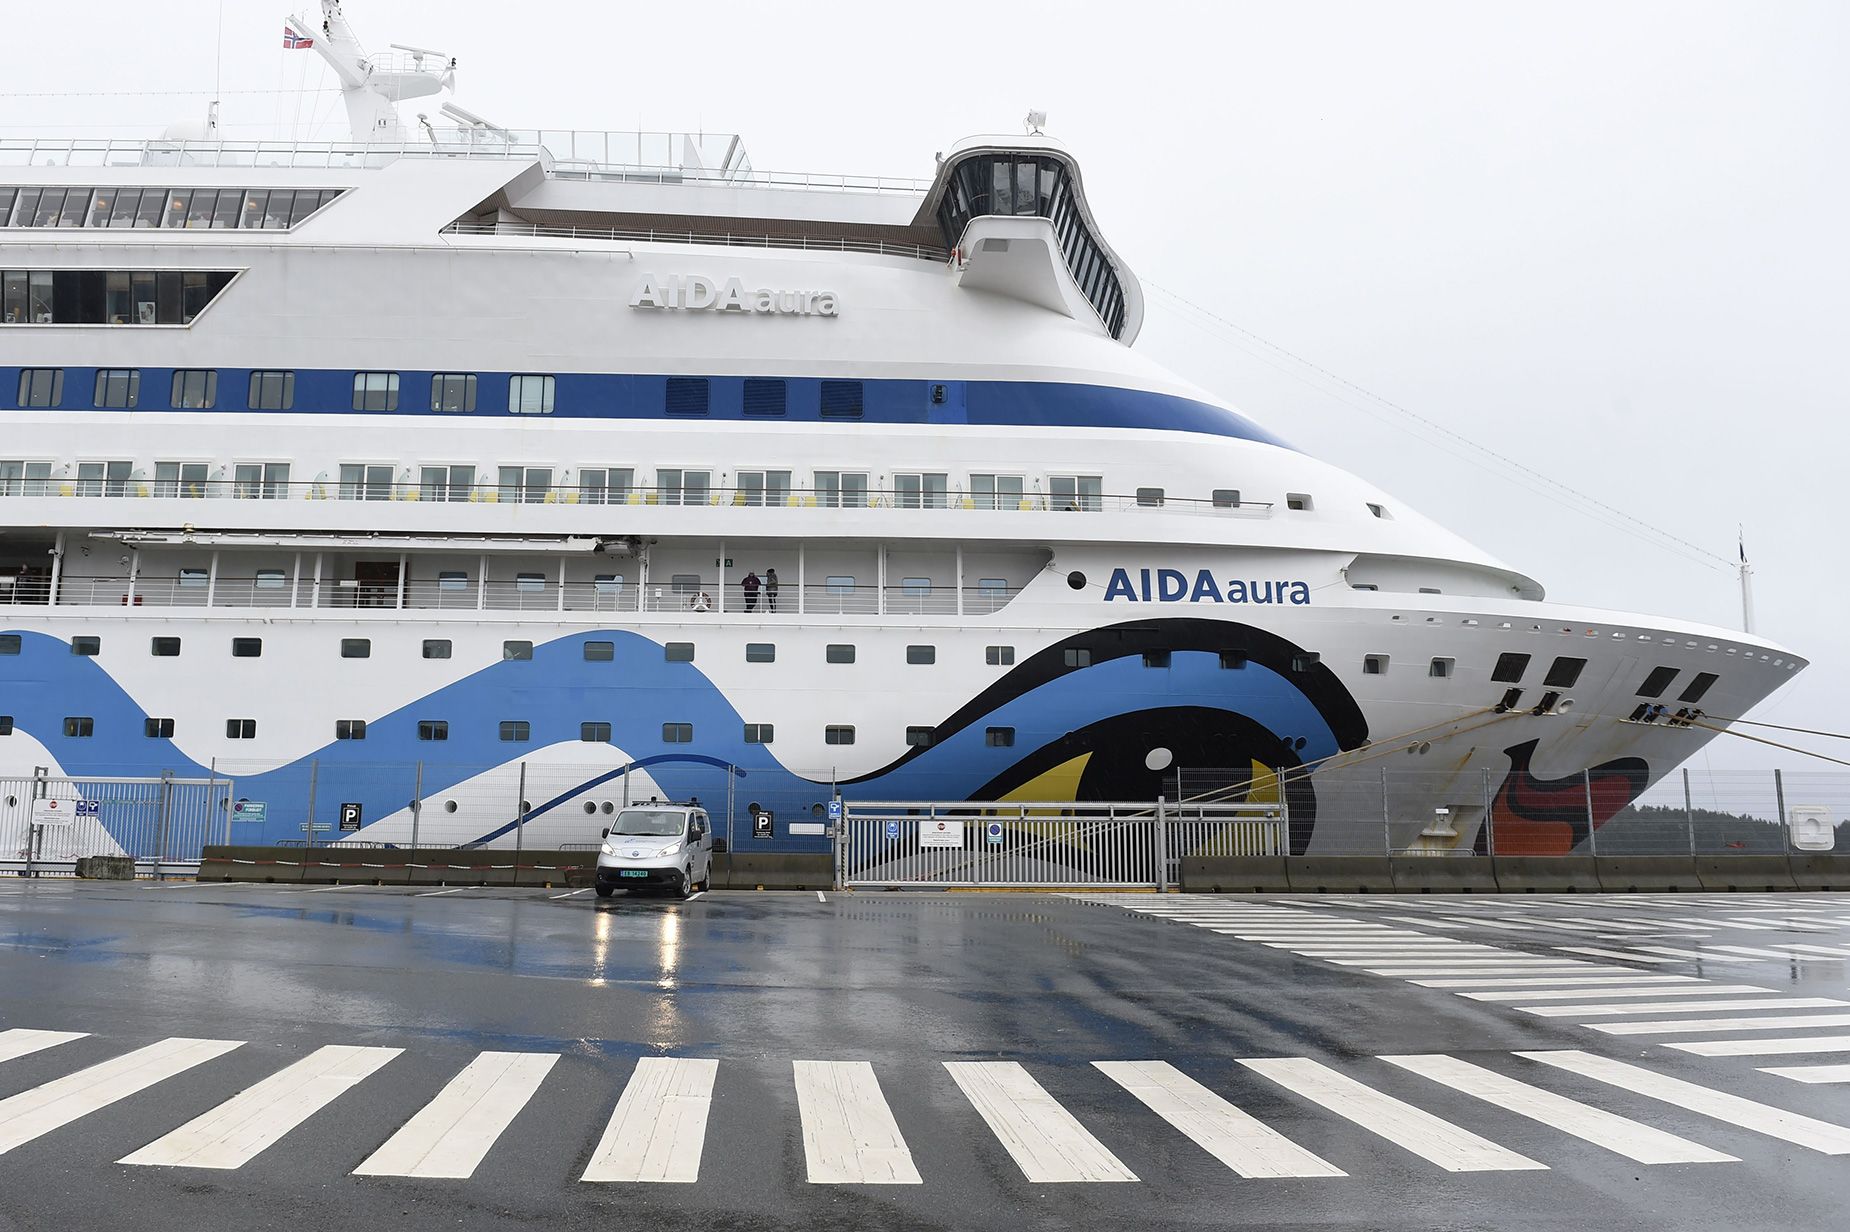 The German cruise ship Aida Aura is pictured on March 3, 2020 at the quay in Haugesund, Norway, pending the answer, whether two quarantineed passengers have been infected with the coronavirus. - Two passengers on board the ship have shown symptoms of corona infection and the ship on March 2, 2020 has posponed its departure from Haugesund, Norway, while waiting for the results of medical tests. (Photo by Marit Hommedal / NTB Scanpix / AFP) / Norway OUT (Photo by MARIT HOMMEDAL/NTB Scanpix/AFP via Getty Images)